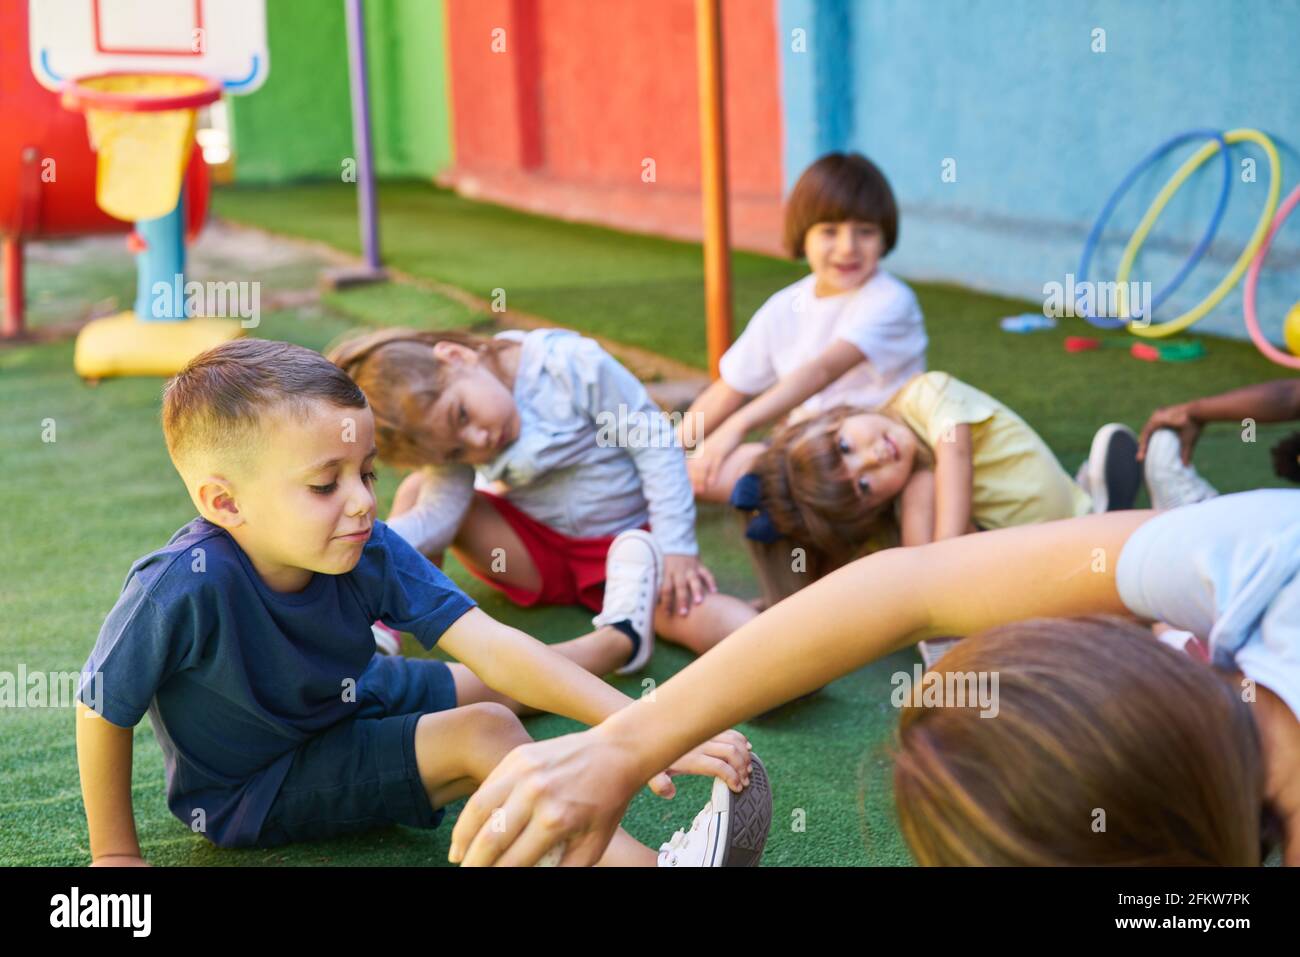 Group of children doing gymnastics together in daycare or preschool Stock Photo